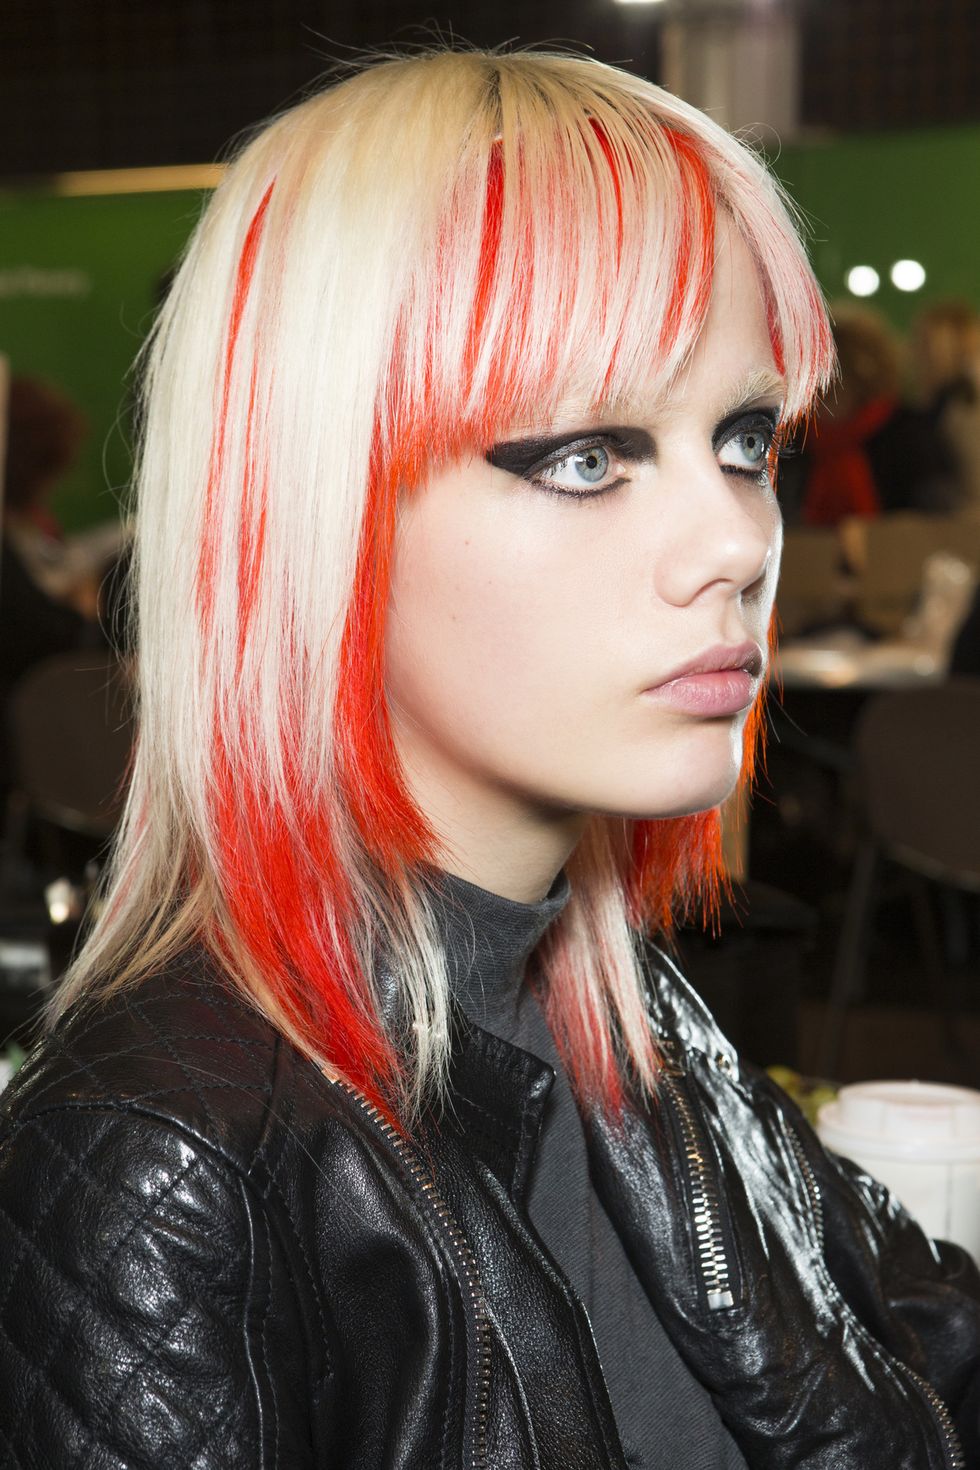 Hair, Hairstyle, Face, Hair coloring, Red, Eyebrow, Blond, Chin, Cool, Pink, 